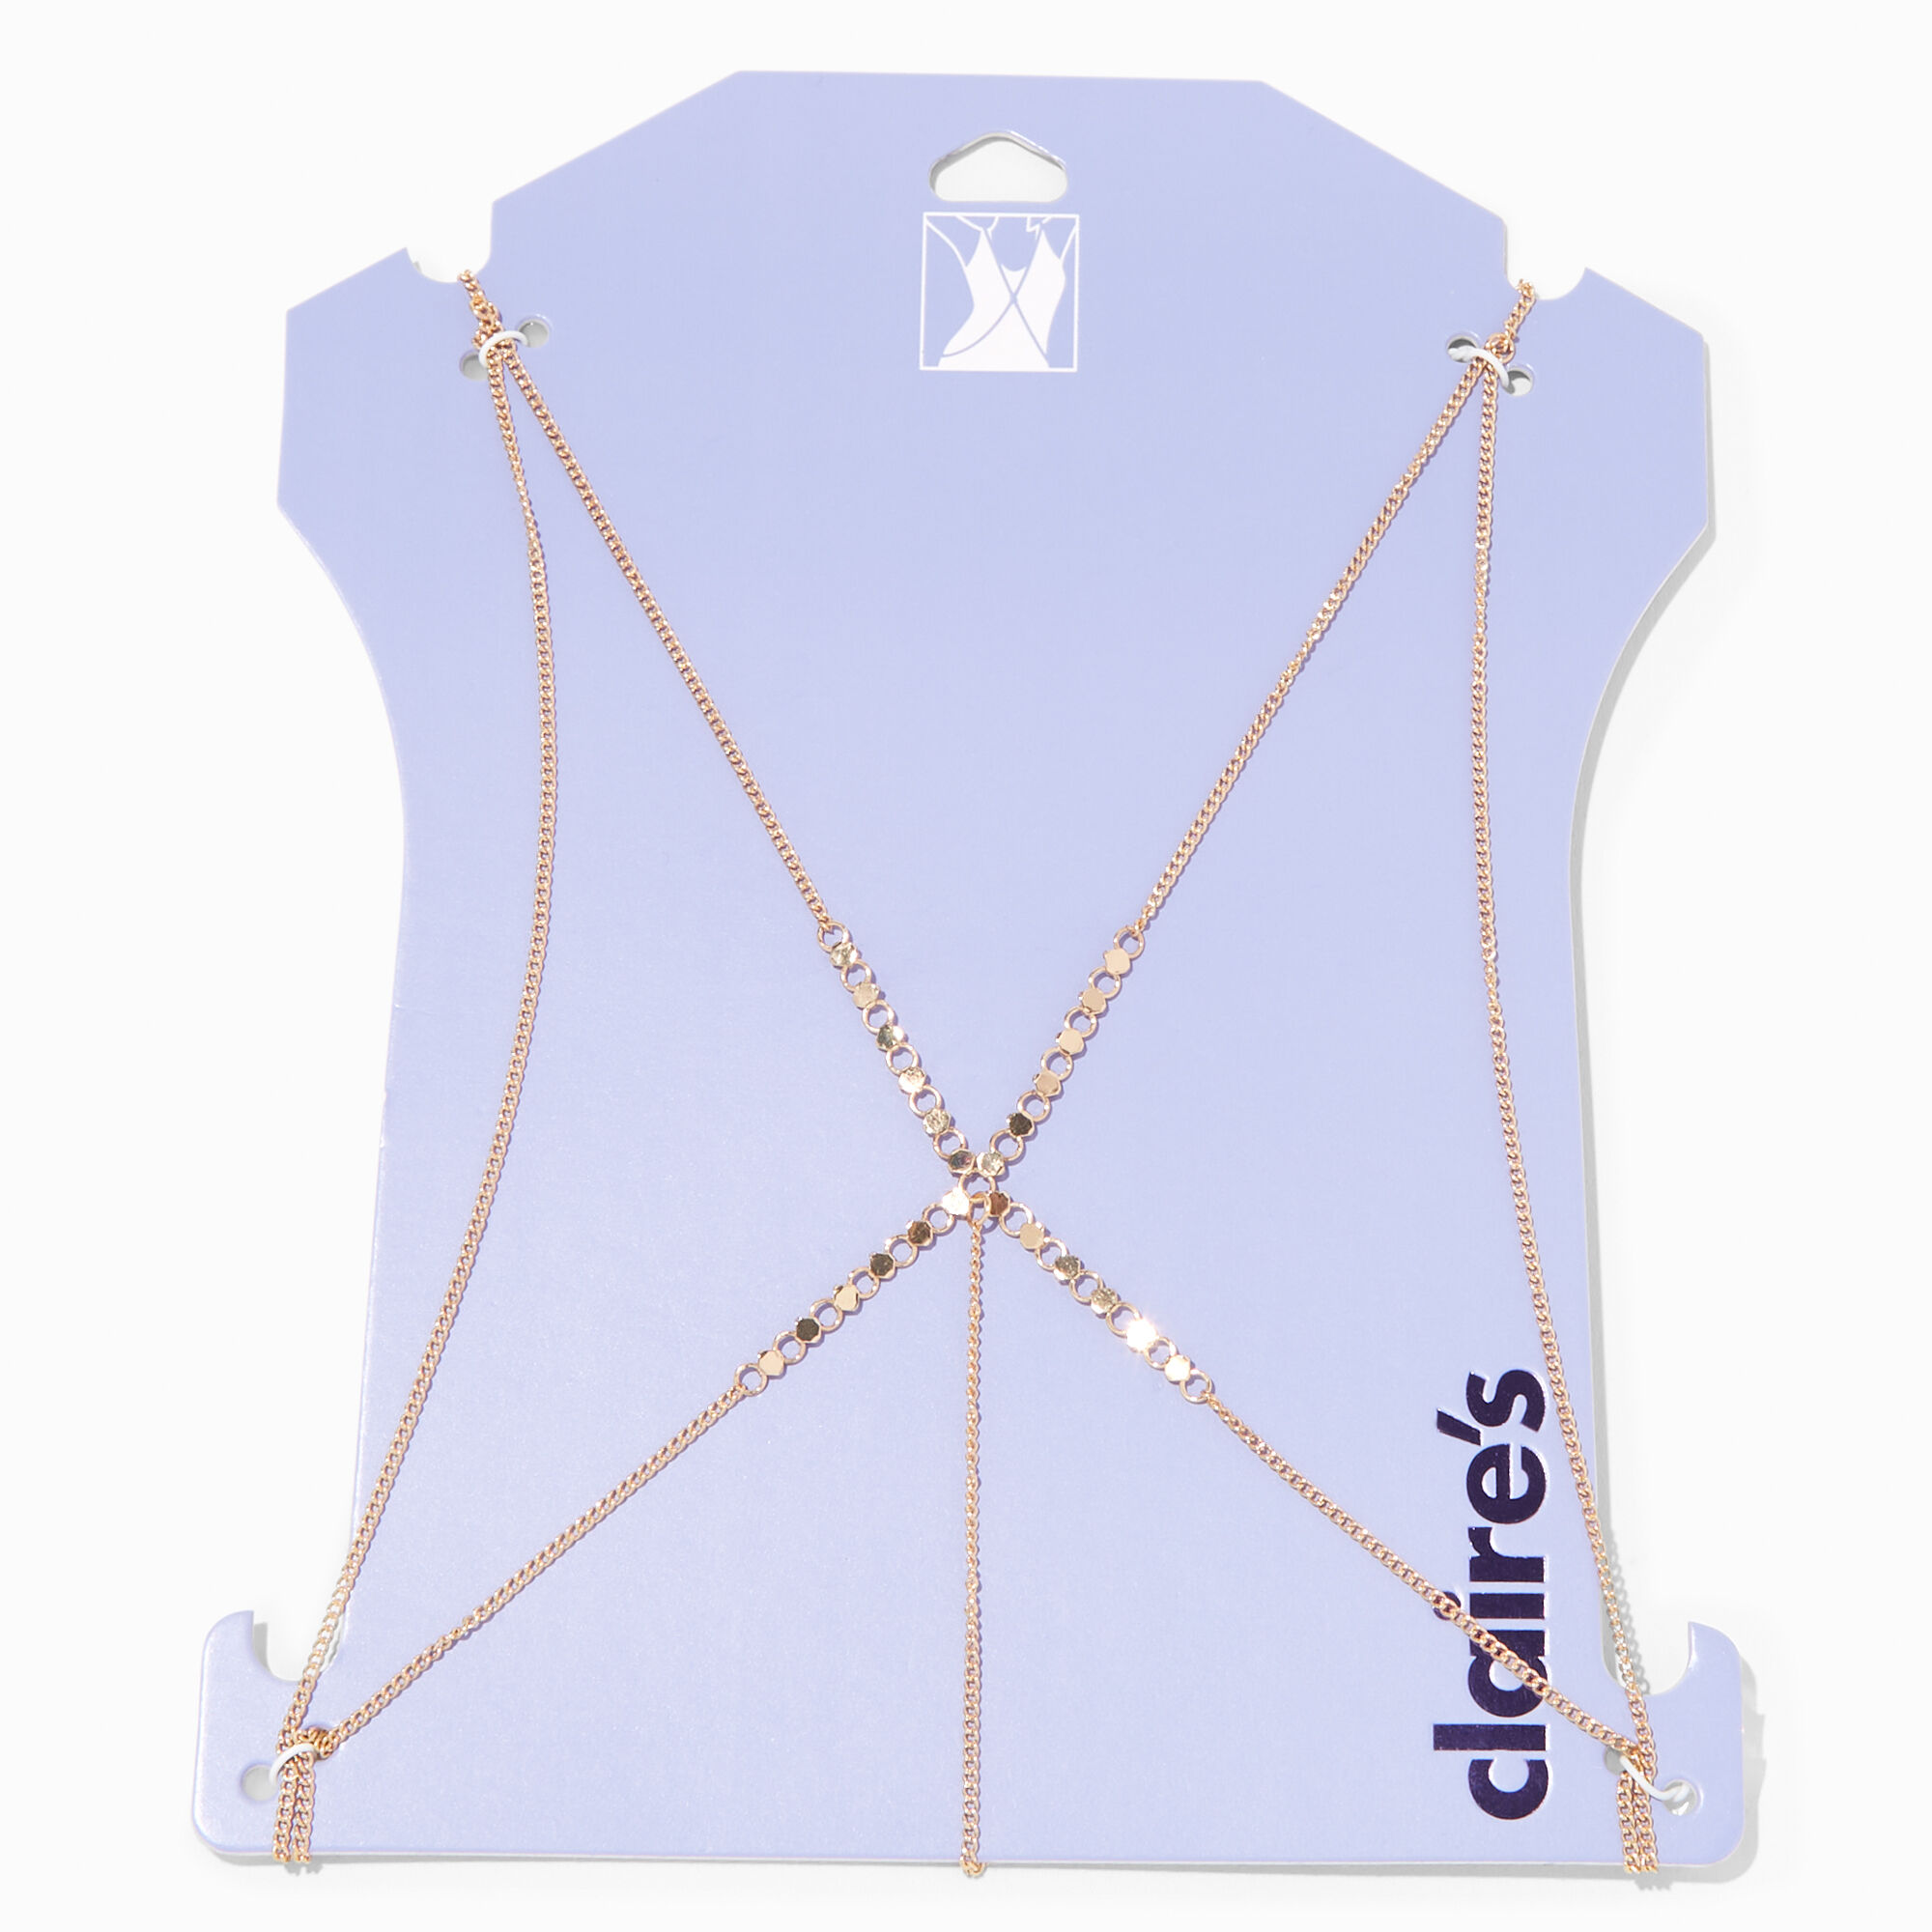 View Claires Tone Body Chain Necklace Gold information